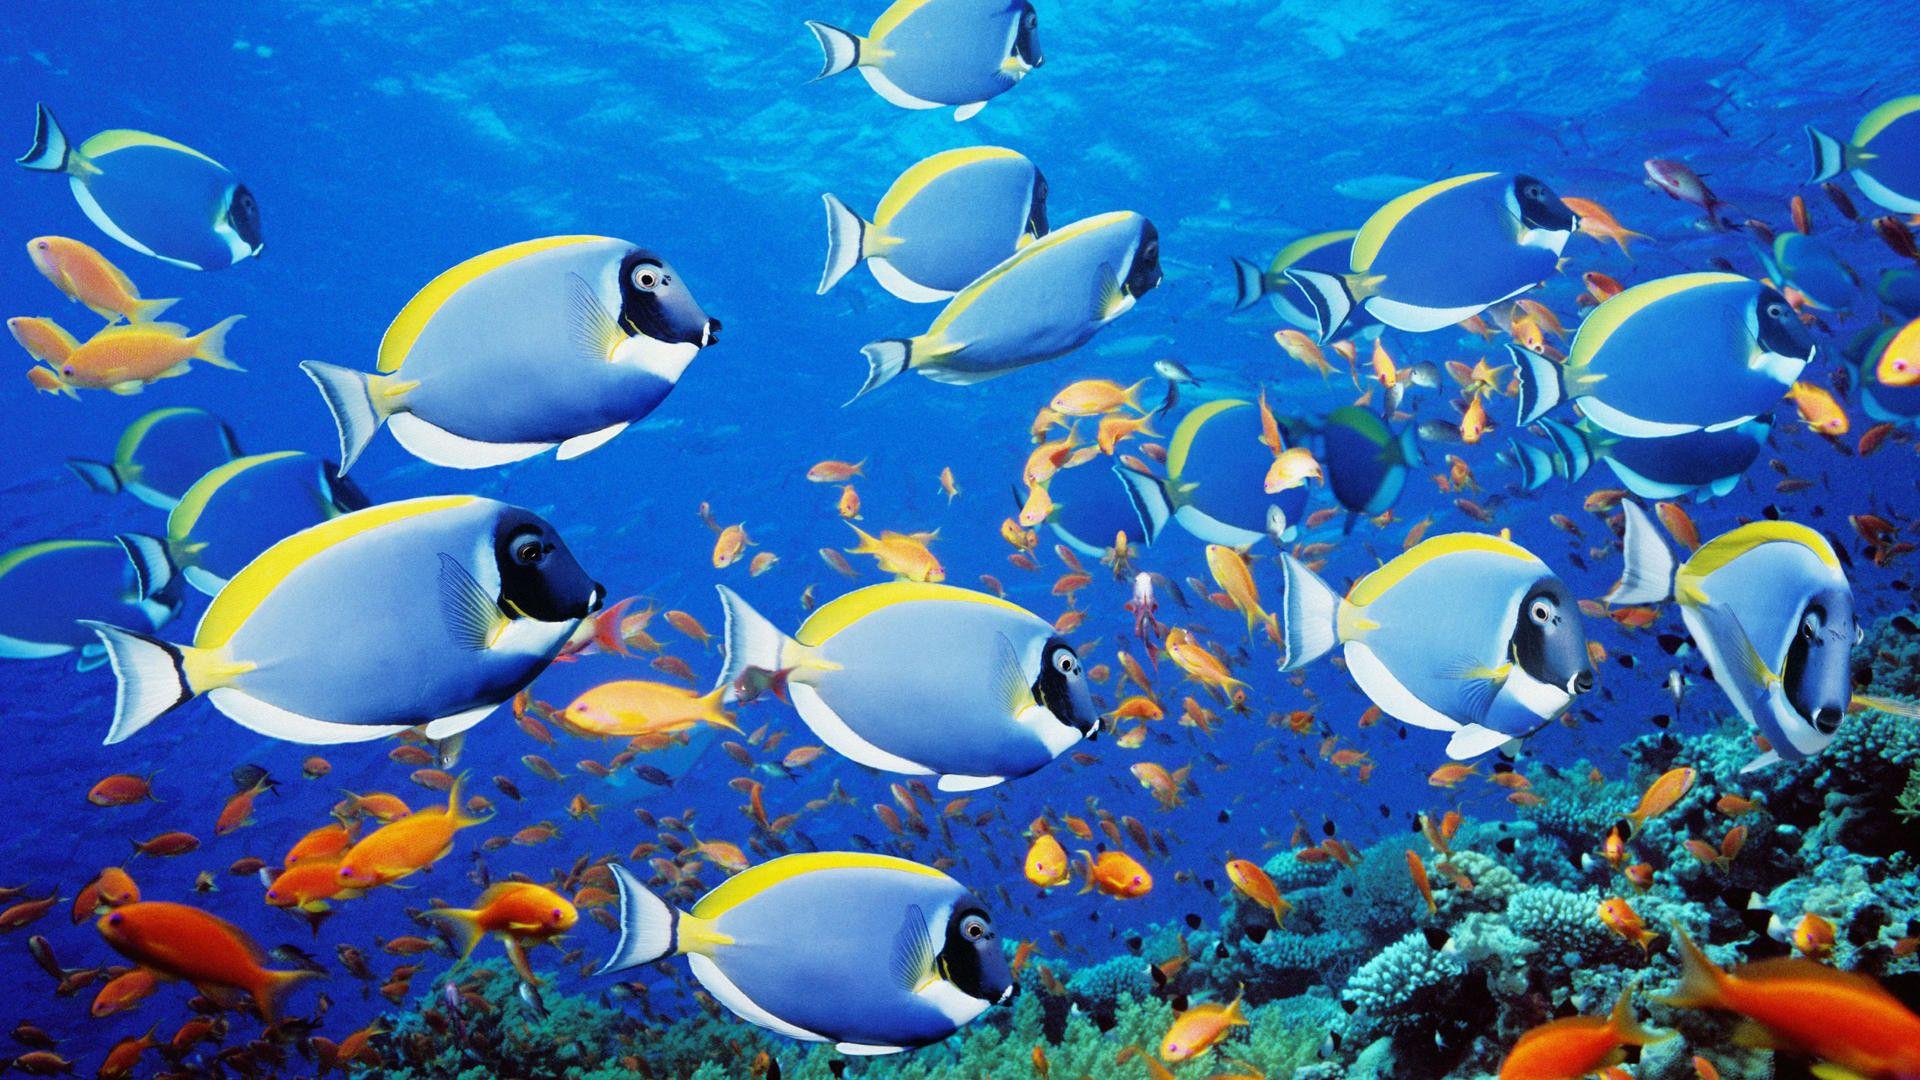 Animated Fish Wallpapers - Top Free